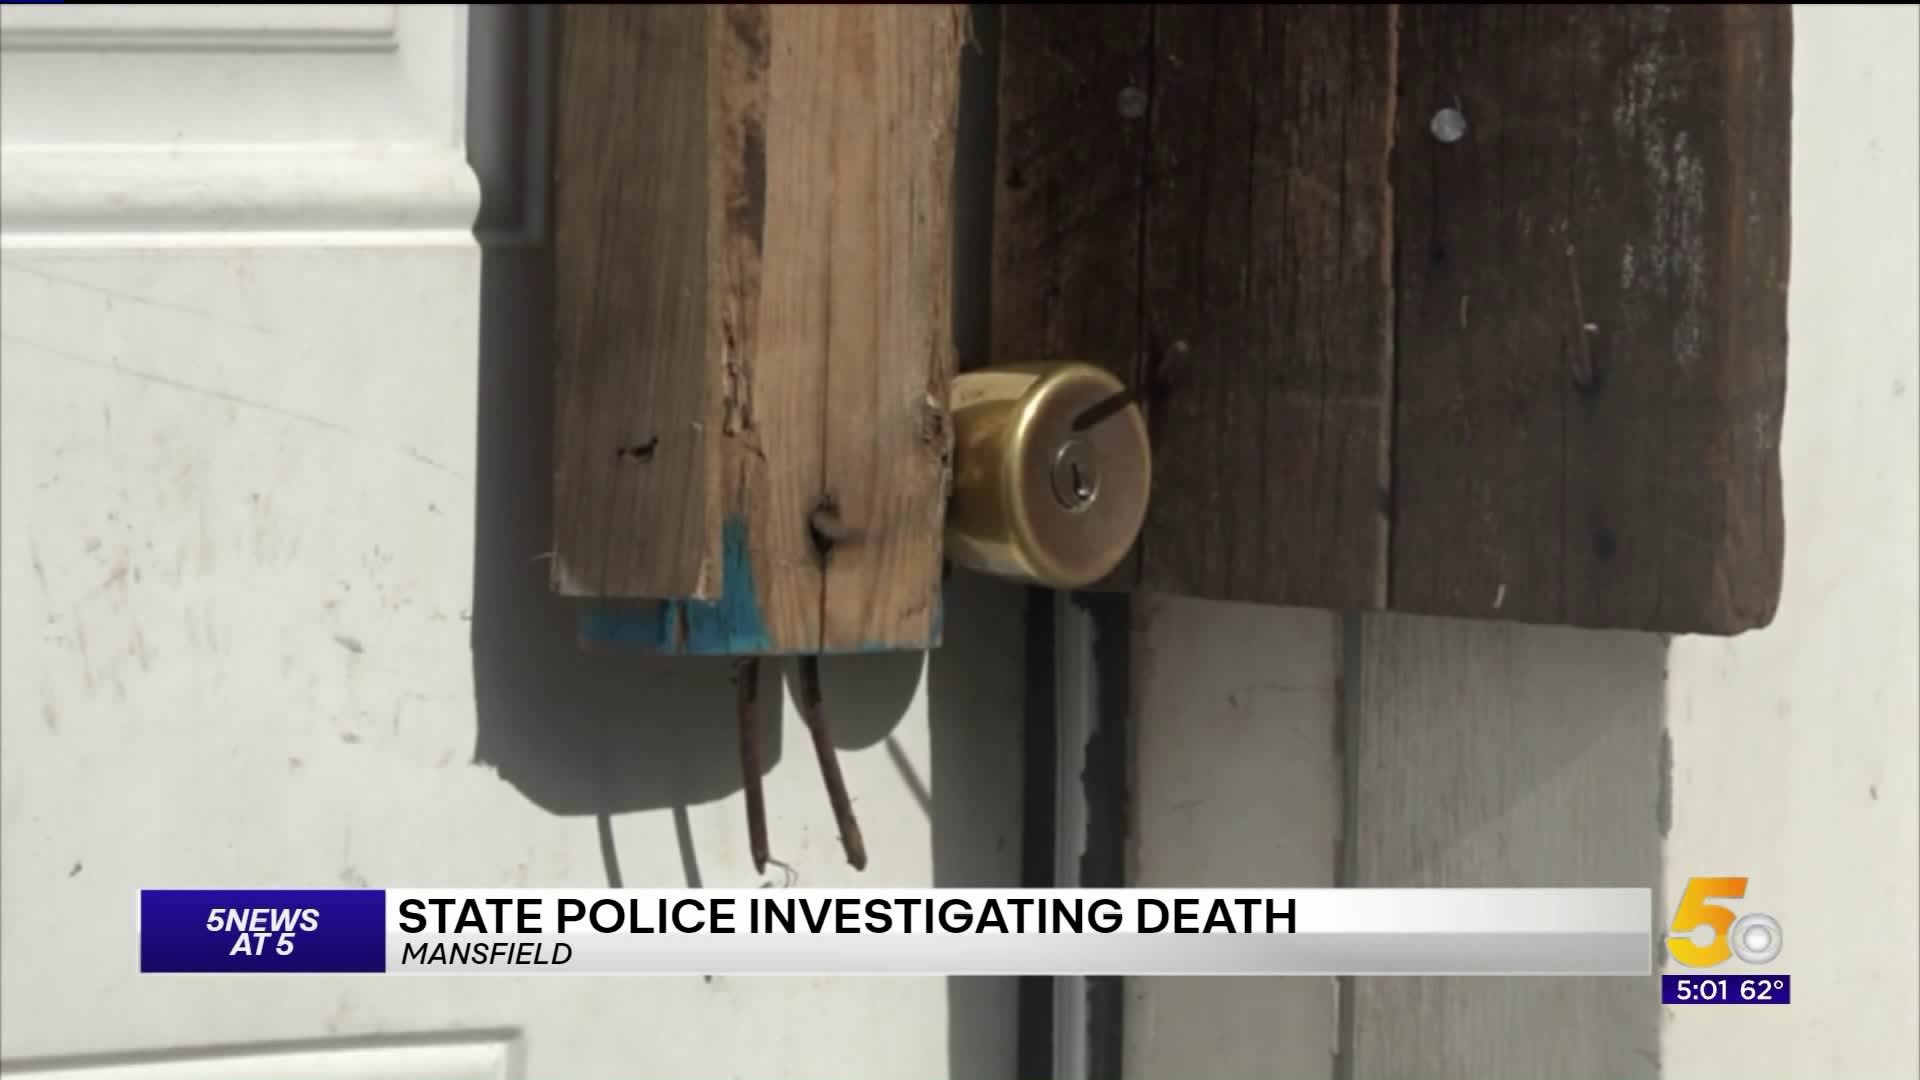 State Police Investigating Suspicious Death At Mansfield Home, Victim Identified